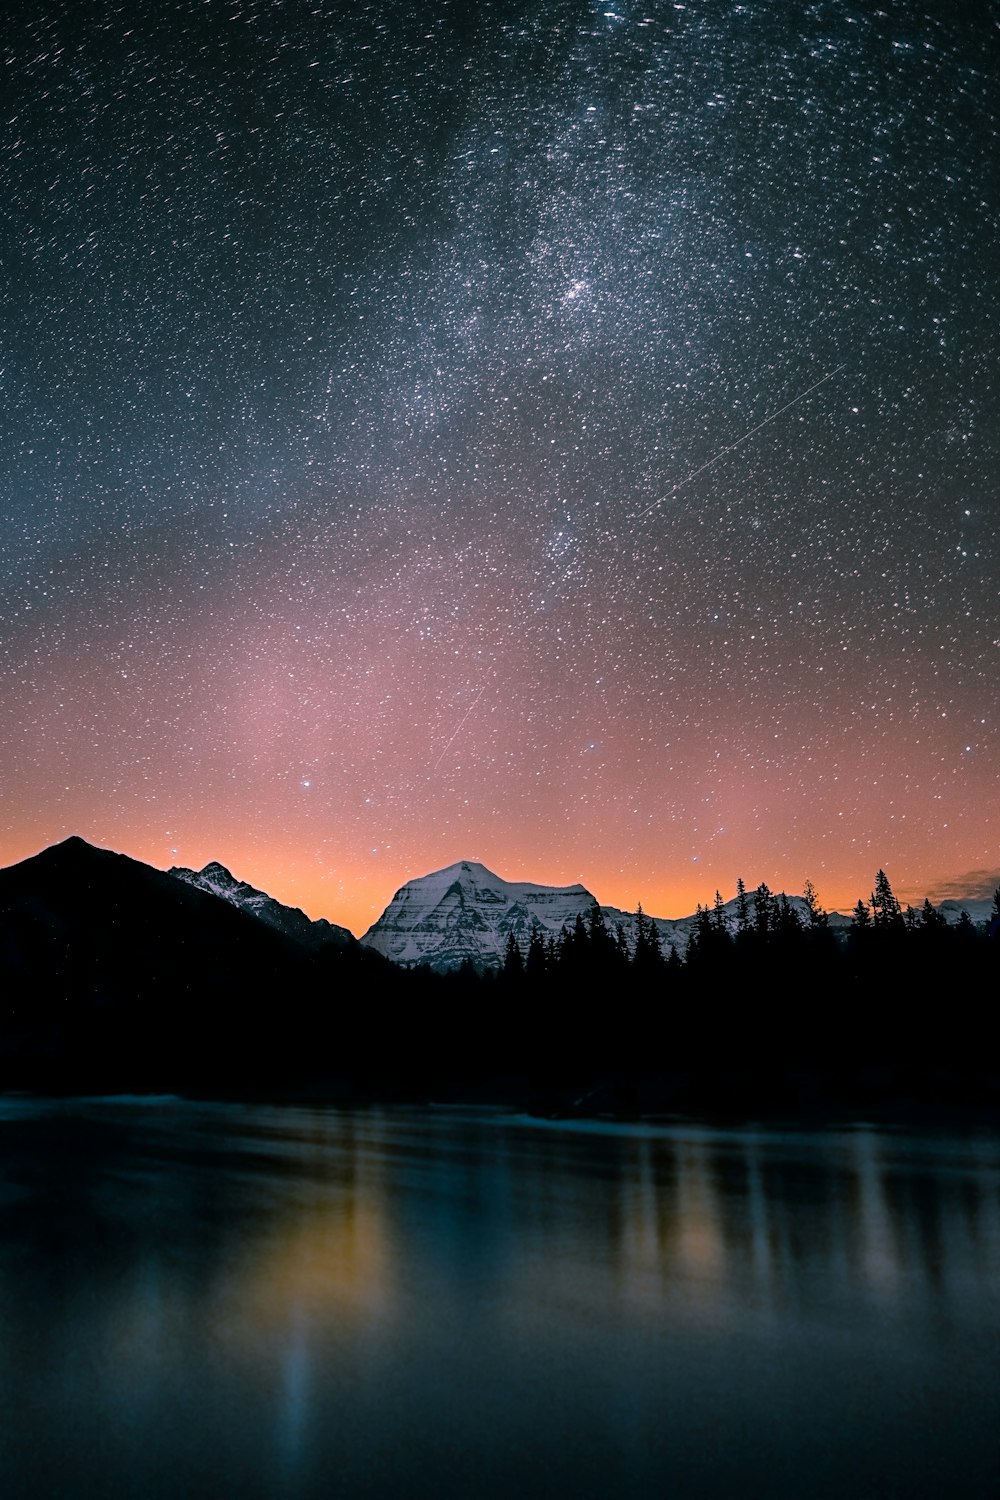 lake surrounded by trees and mountain under milky way